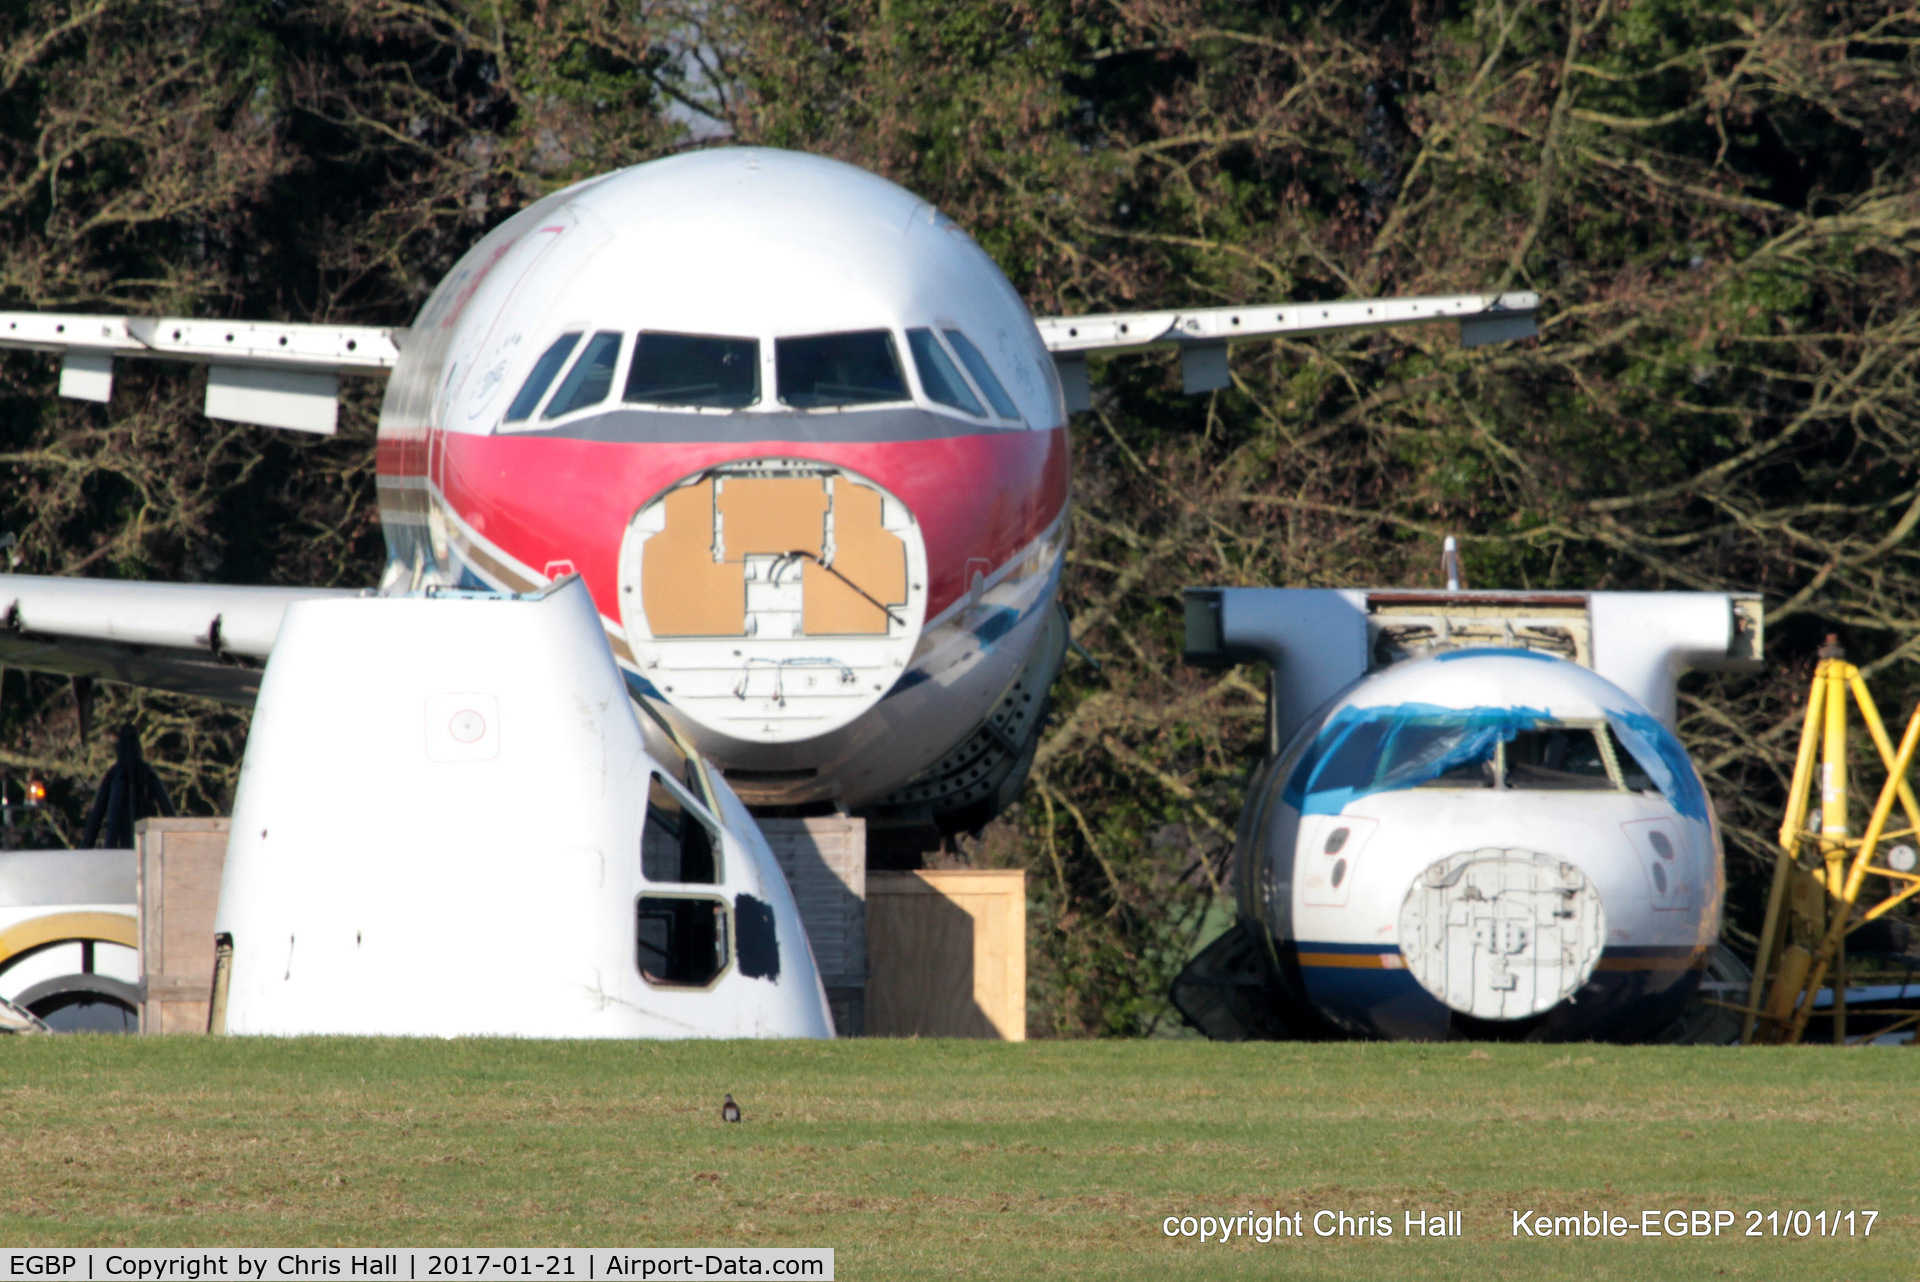 Kemble Airport, Kemble, England United Kingdom (EGBP) -  ex B-2332 China Eastern Airlines A319 and G-ISLI Blue Islands ATR 72 in the scrapping area at Kemble